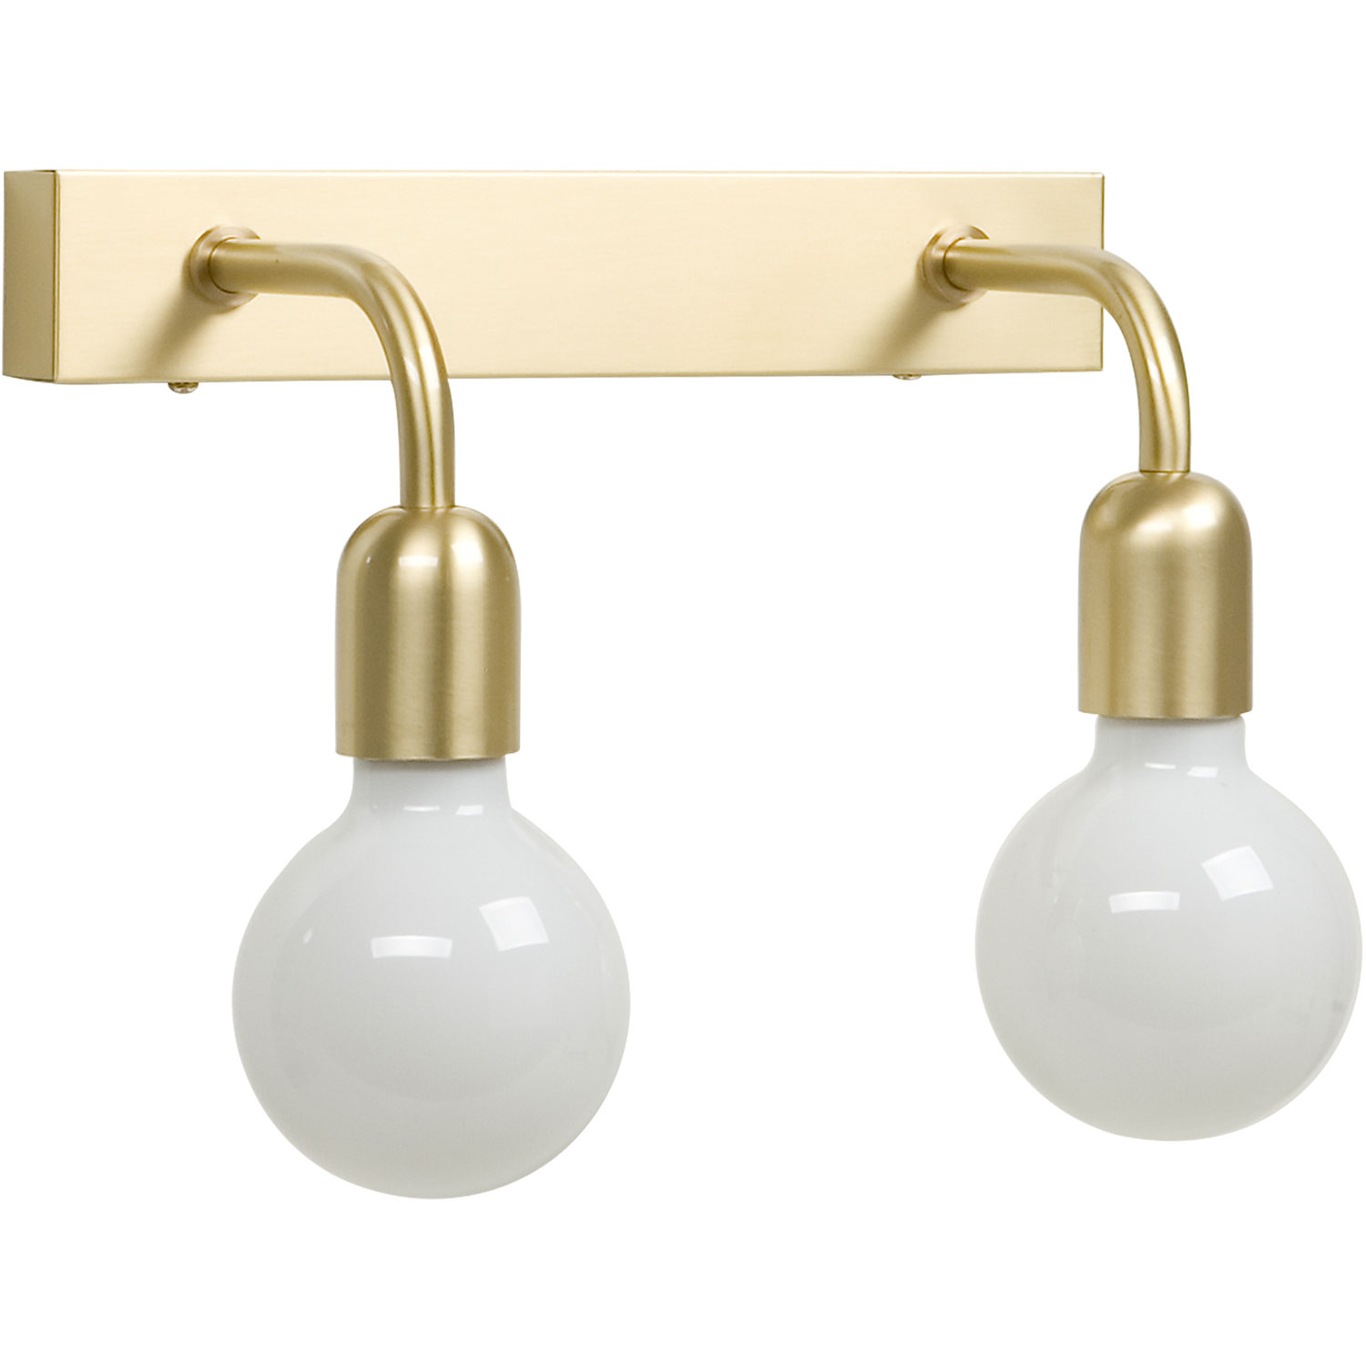 Regal 2 Wall Lamp, Brushed Brass